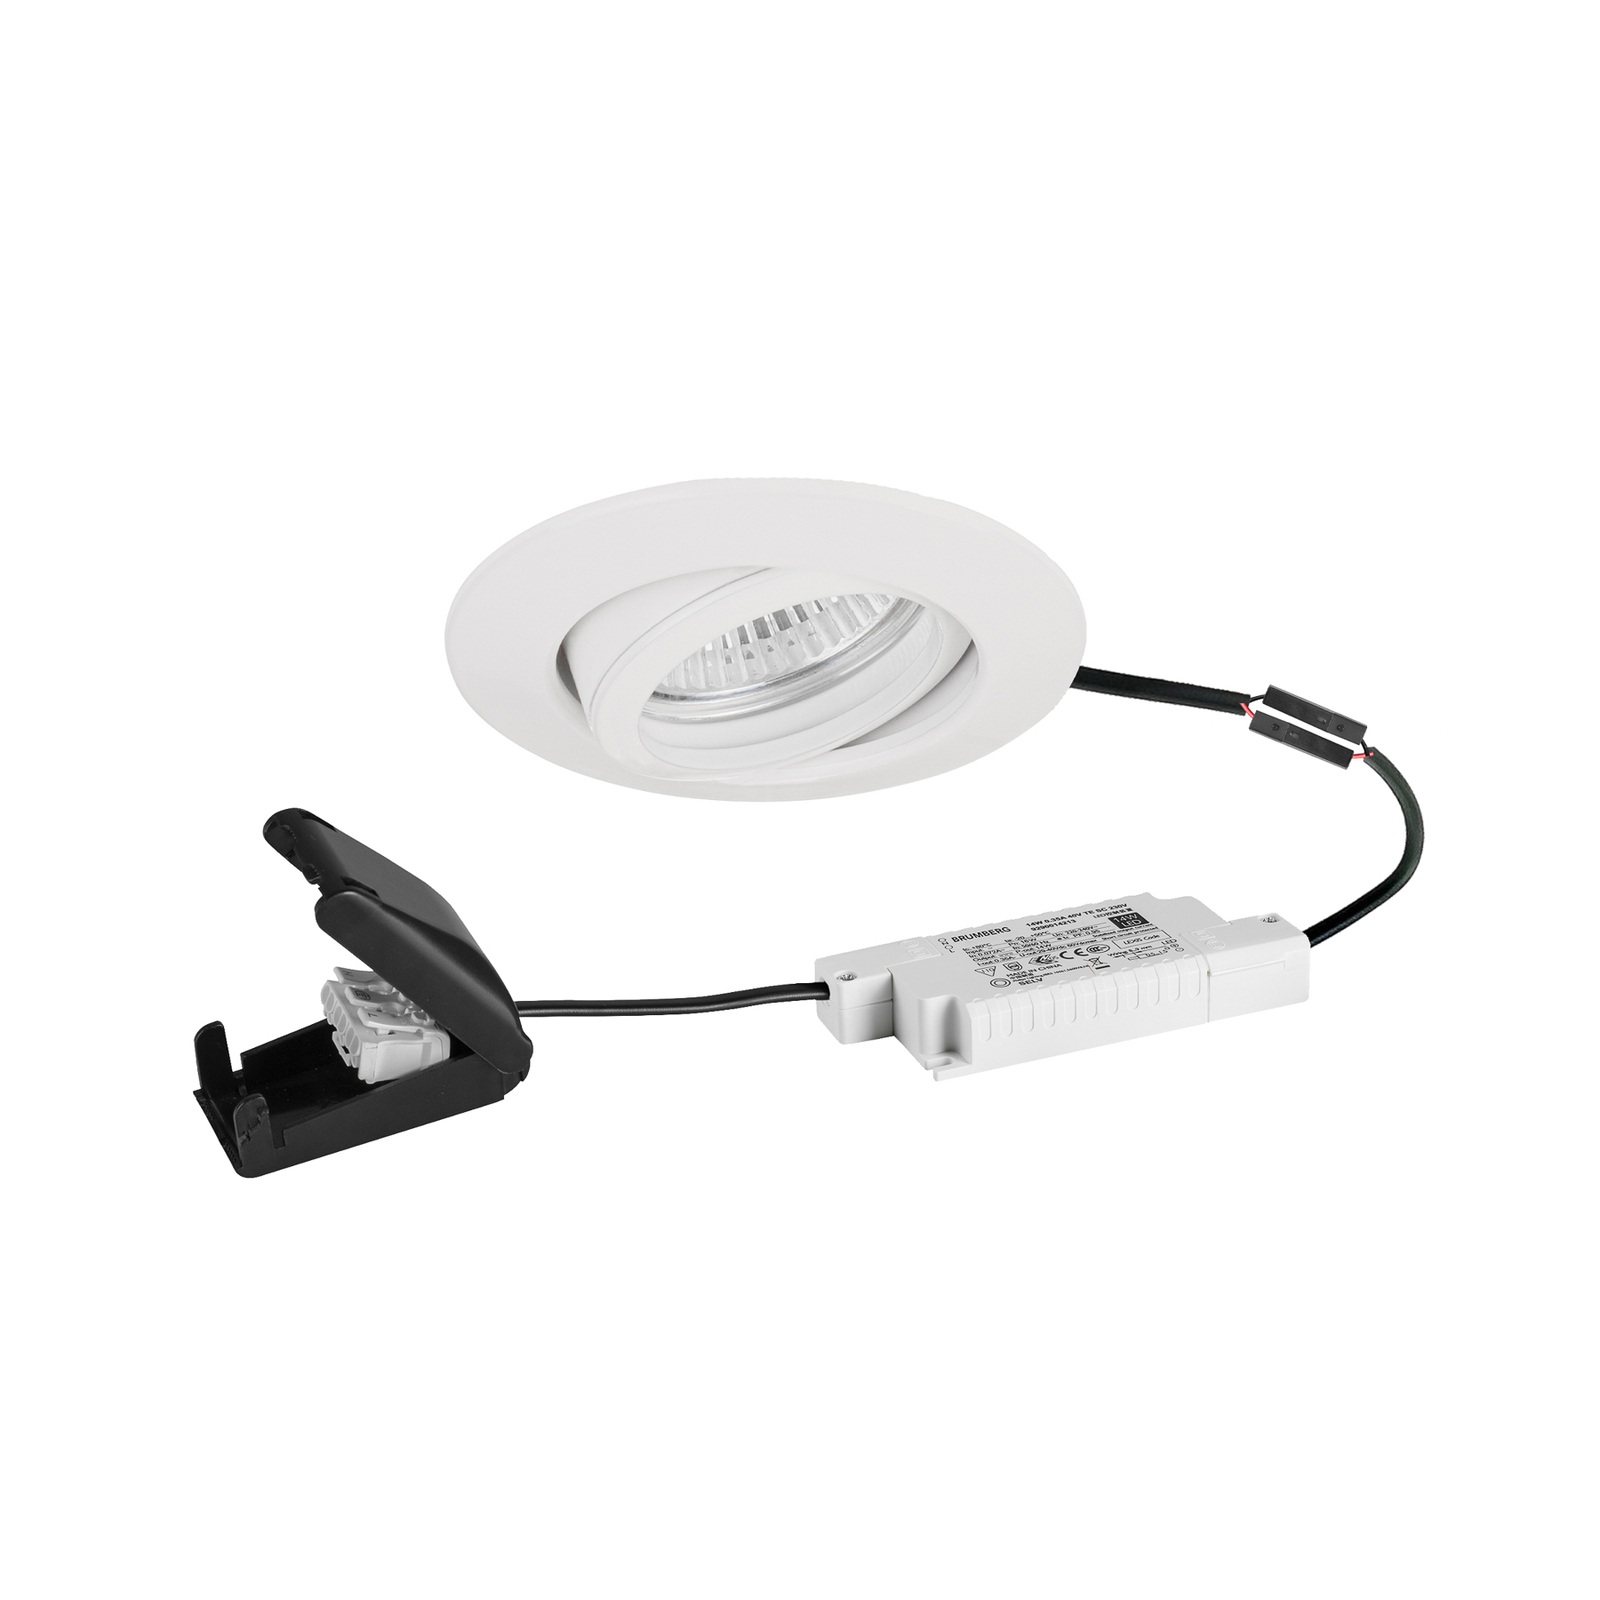 BRUMBERG Spot BB13 dimmable2warm RC-dim connection box textured white